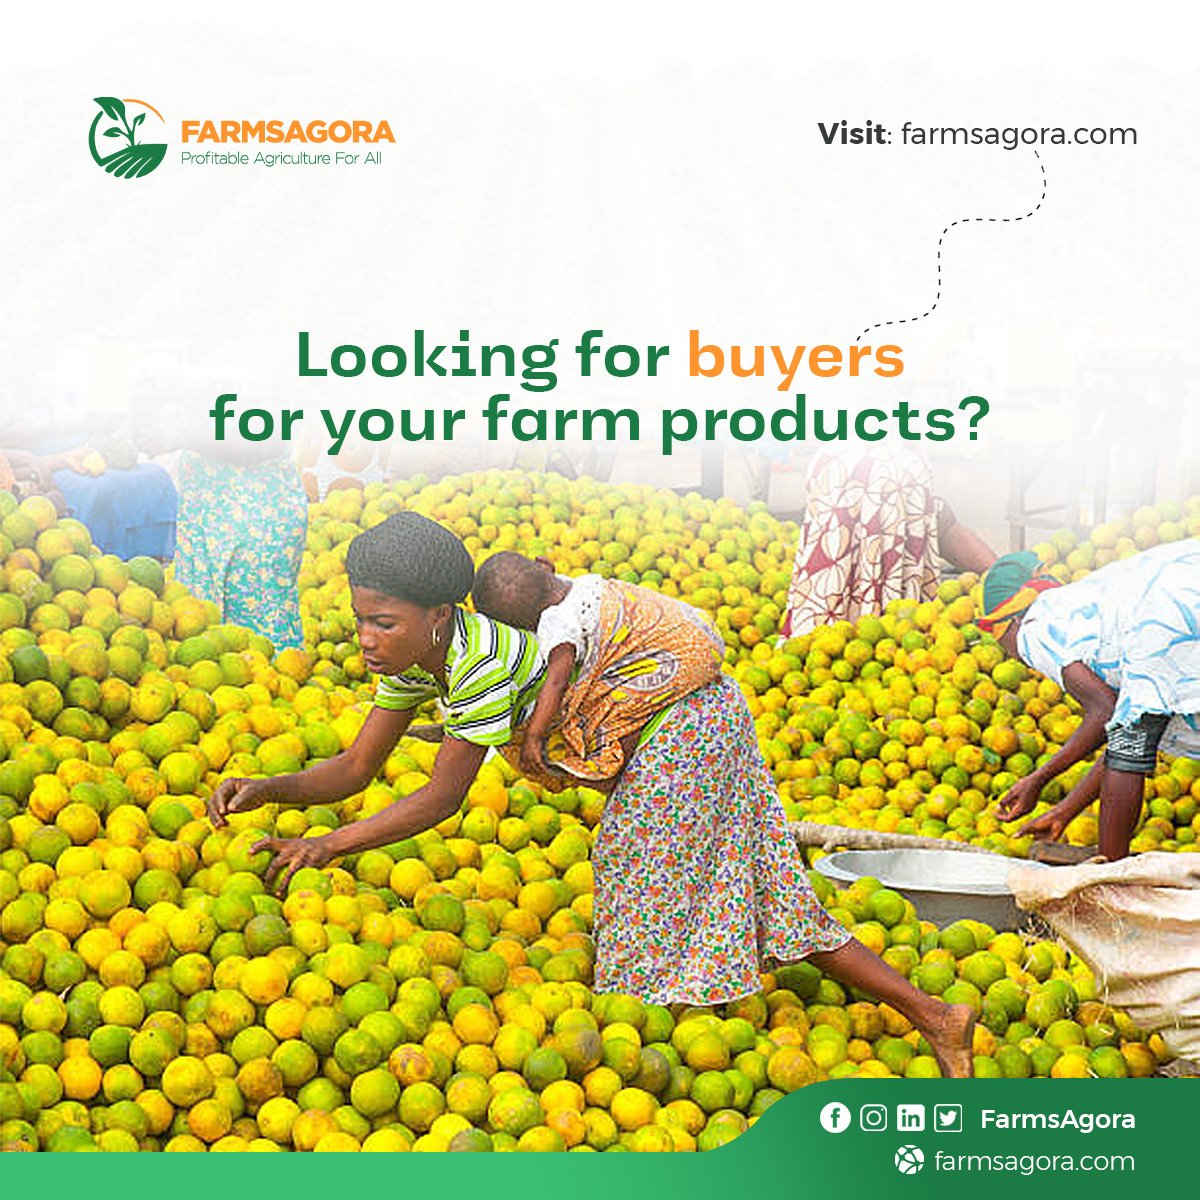 Those sumptuous fruits in your barn 🍊🍐🍉 must locate buyers this weekend.

Let's link you to your customers now.
Register on our Platform today.

#SustainableAgriculture #TGIF #FutureFarming' #HarvestingHope #AgriculturalApp #WeekendHarvest #FarmingInnovation #agriculture #crop